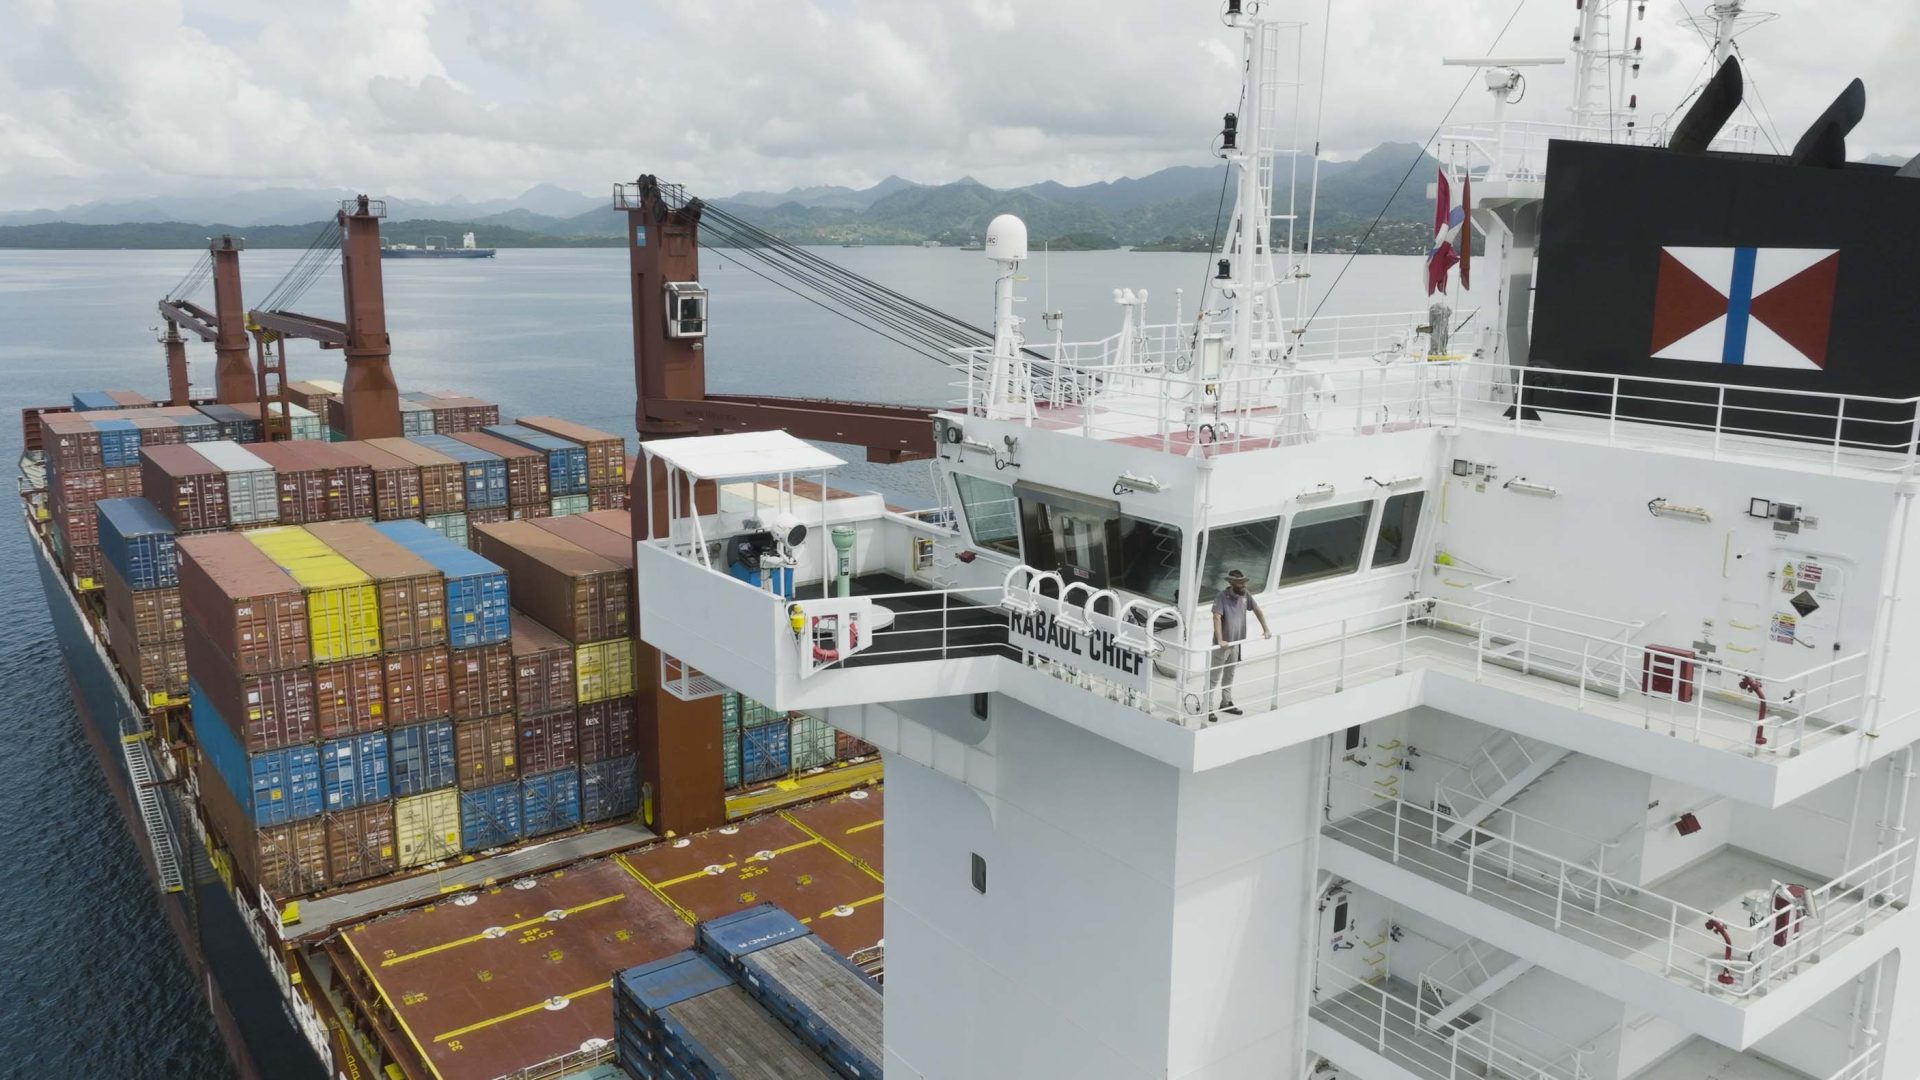 The small figure of Thor standing on the deck of a cargo ship in Fiji.